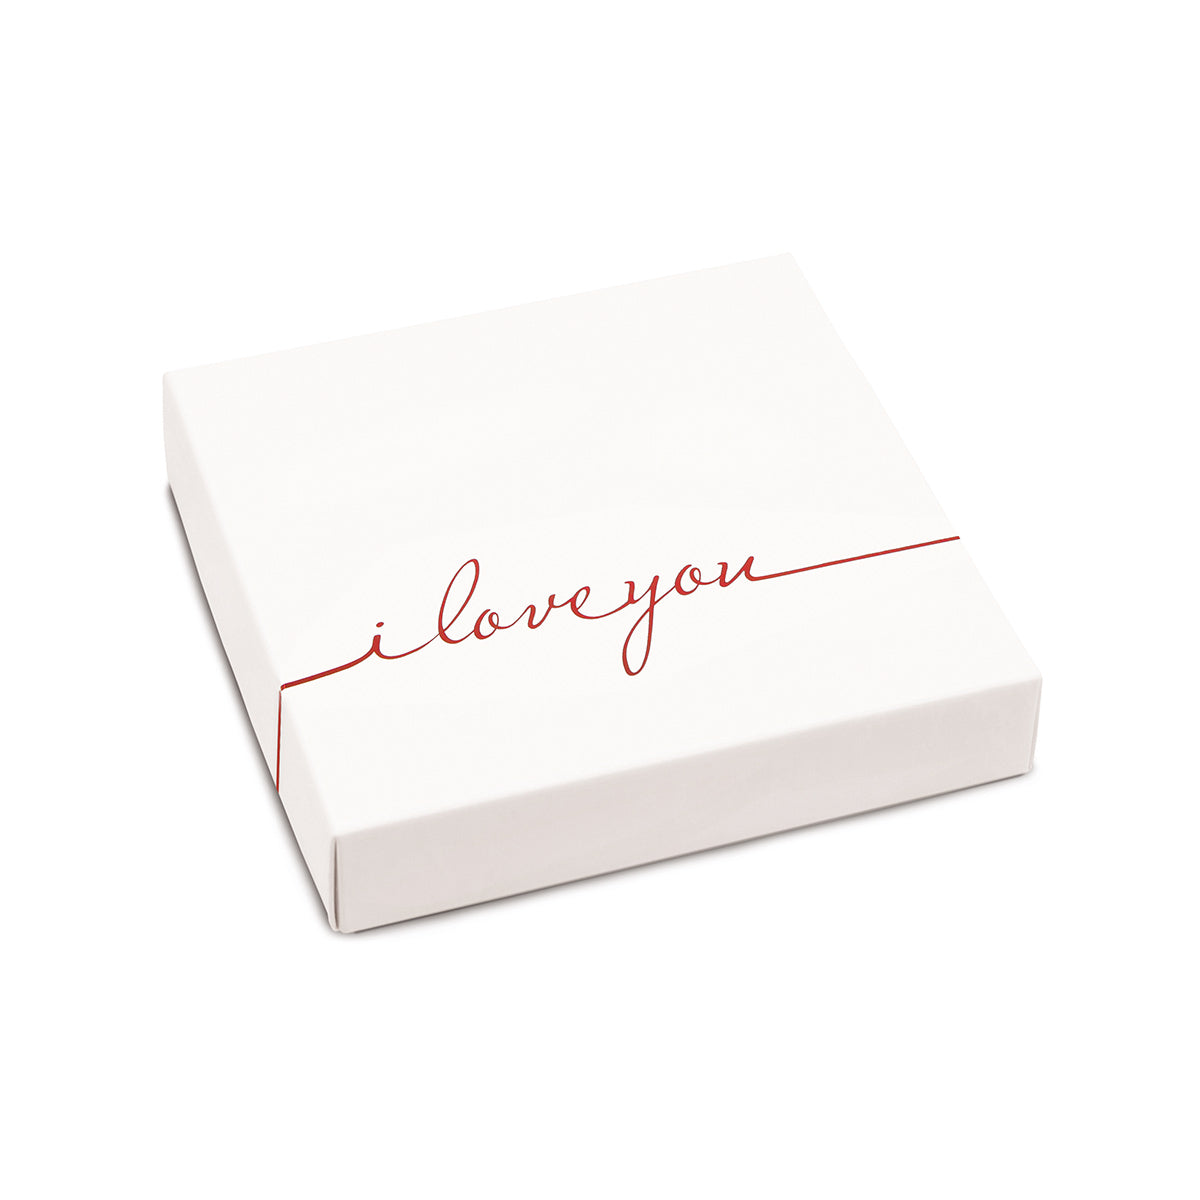 I Love You Themed Box Cover for 9 Piece Holiday Assortment